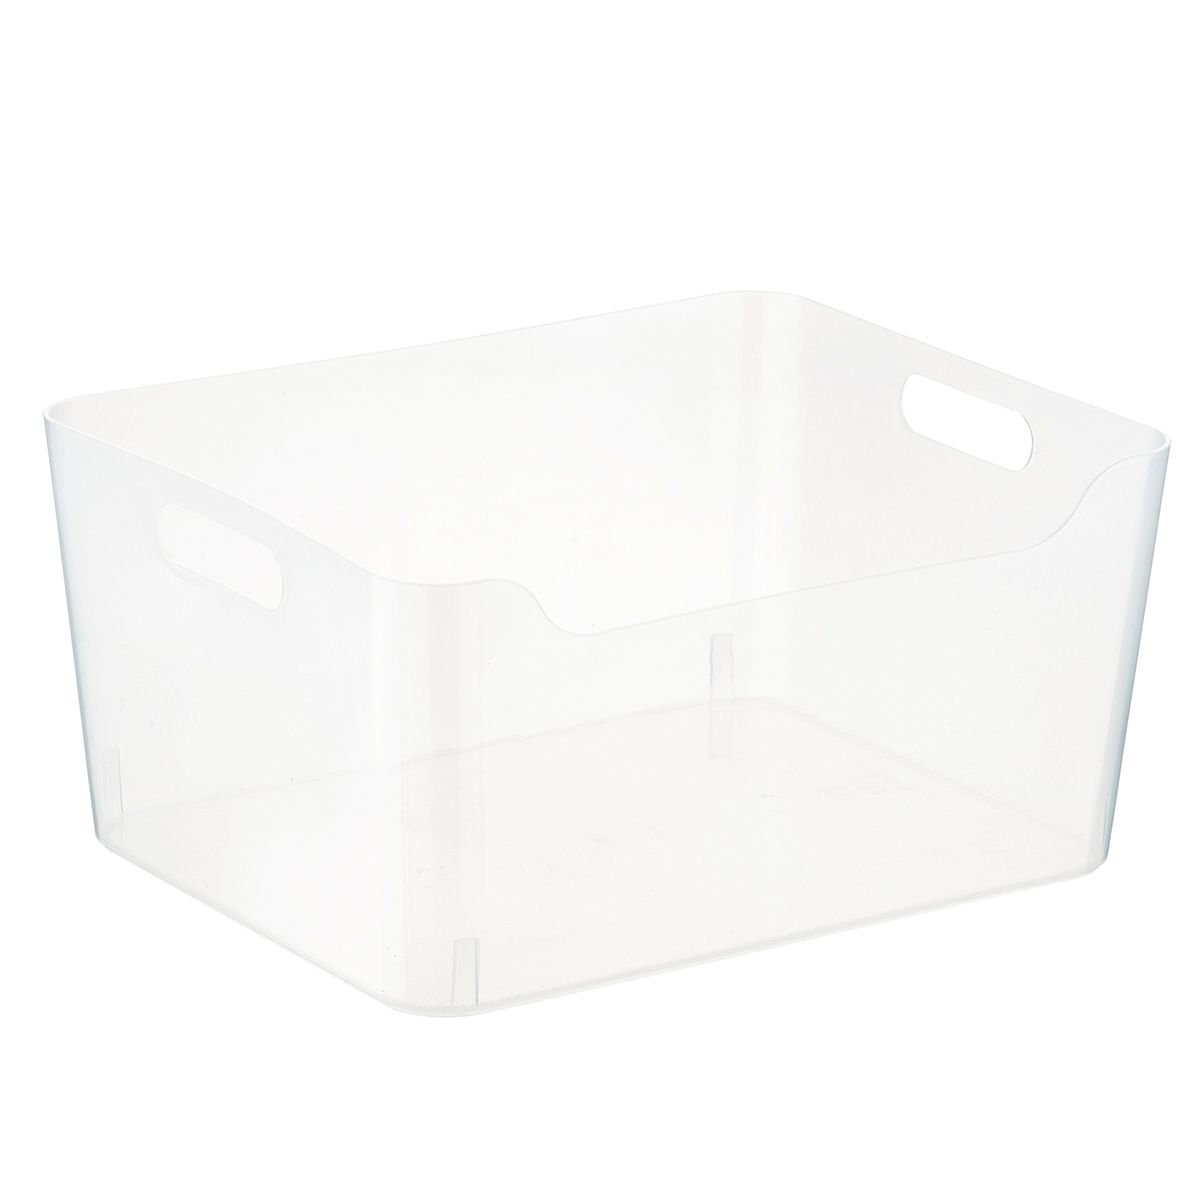 Plastic Storage Bin w/Handles | The Container Store